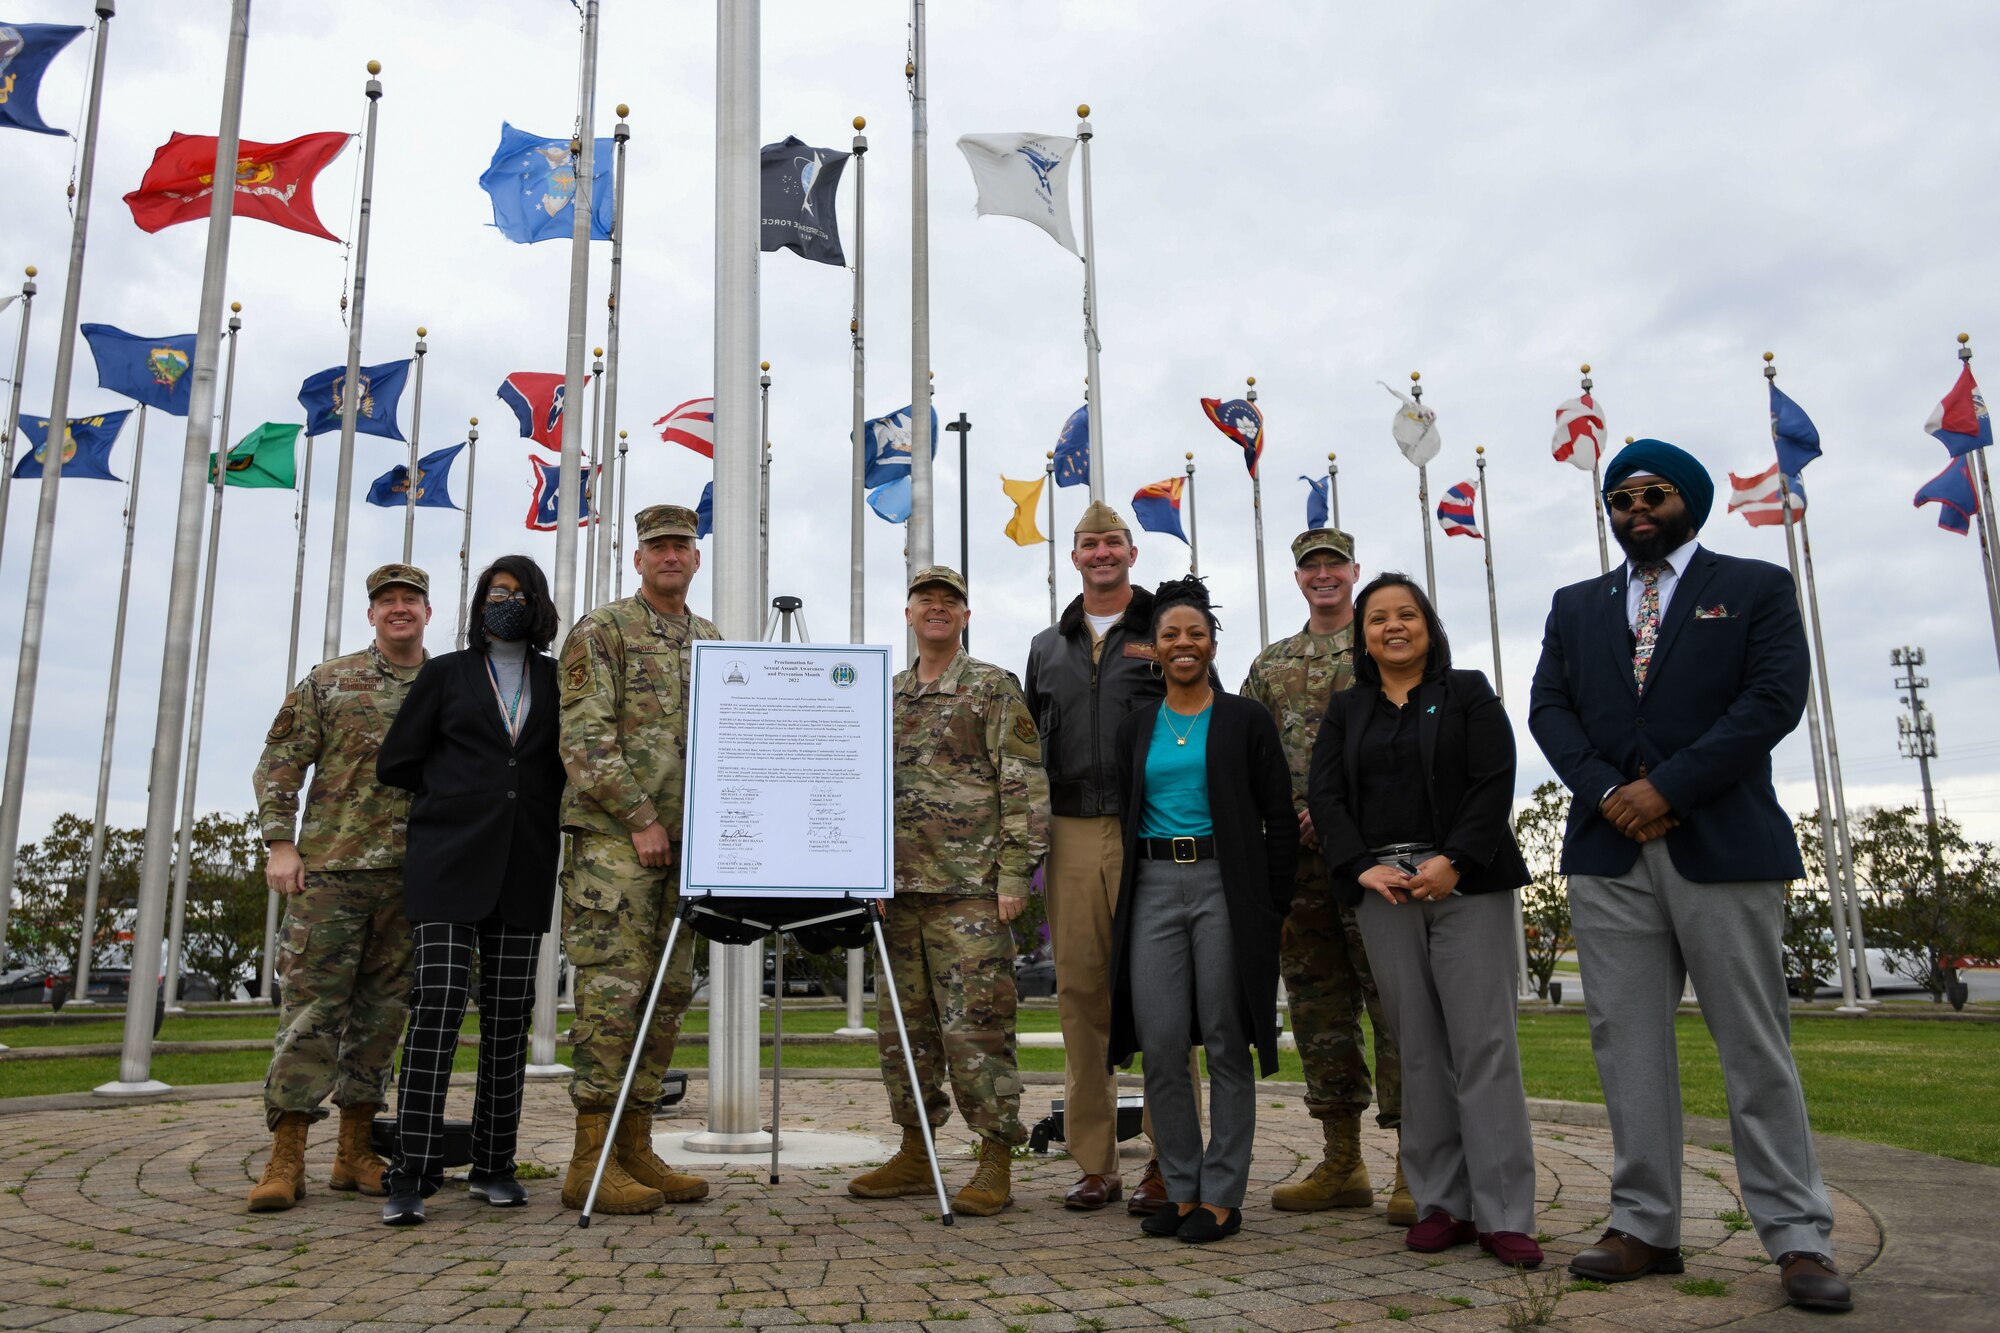 Joint Base Andrews senior leadership pose for a photo during a proclamation signing dedicated to Sexual Assault Awareness and Prevention Month, April 1, 2022, at Joint Base Andrews, Md.